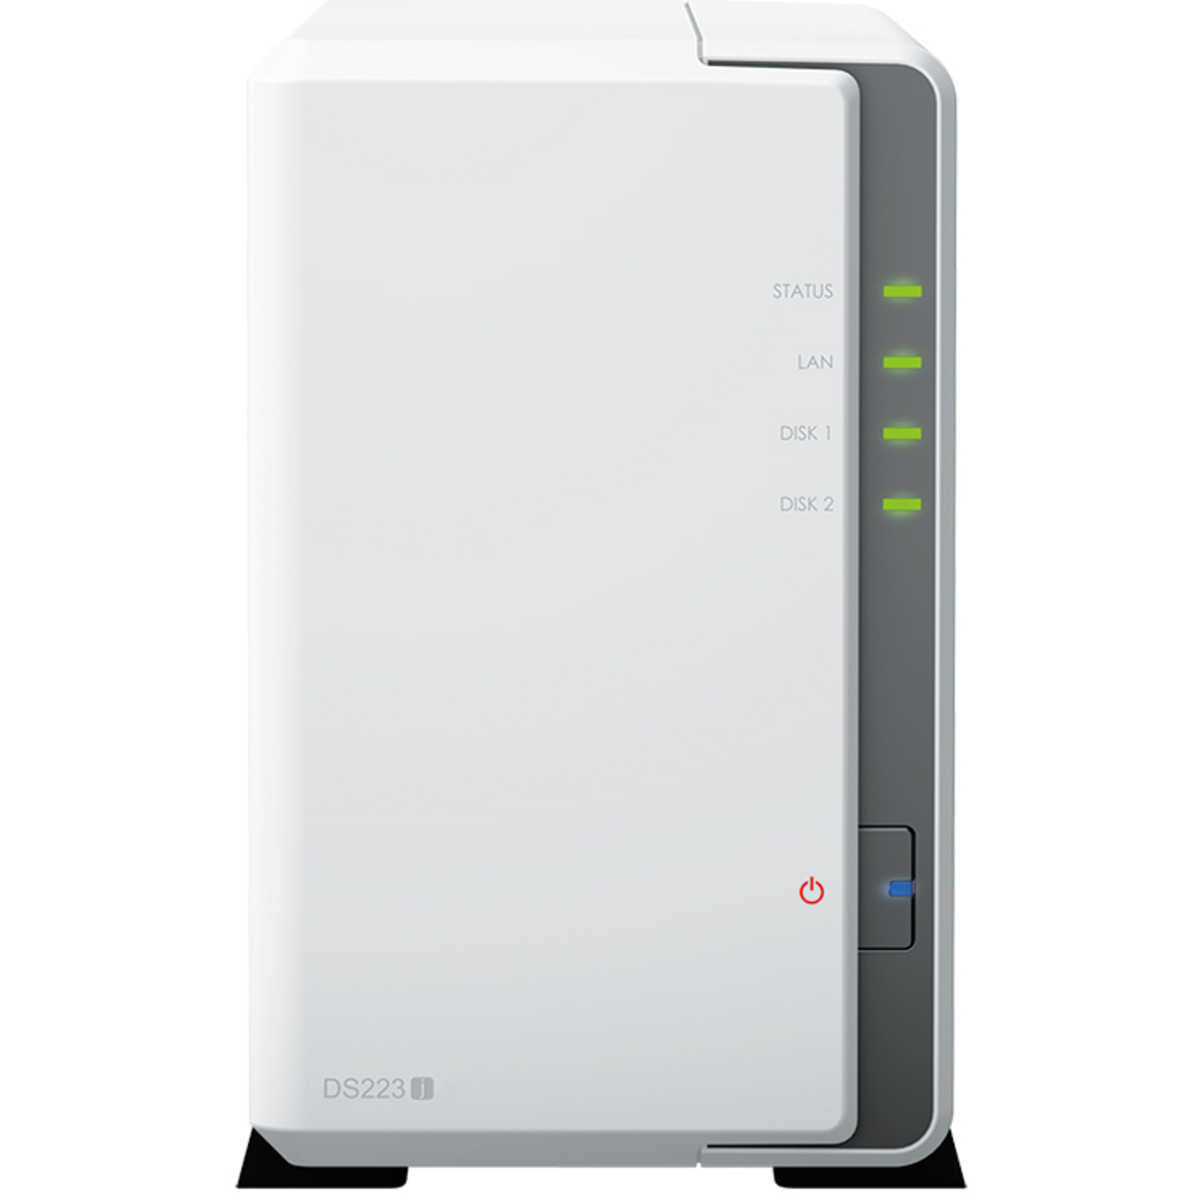 Synology DiskStation DS223j 18tb 2-Bay Desktop Personal / Basic Home / Small Office NAS - Network Attached Storage Device 1x18tb Western Digital Gold WD181KRYZ 3.5 7200rpm SATA 6Gb/s HDD ENTERPRISE Class Drives Installed - Burn-In Tested DiskStation DS223j